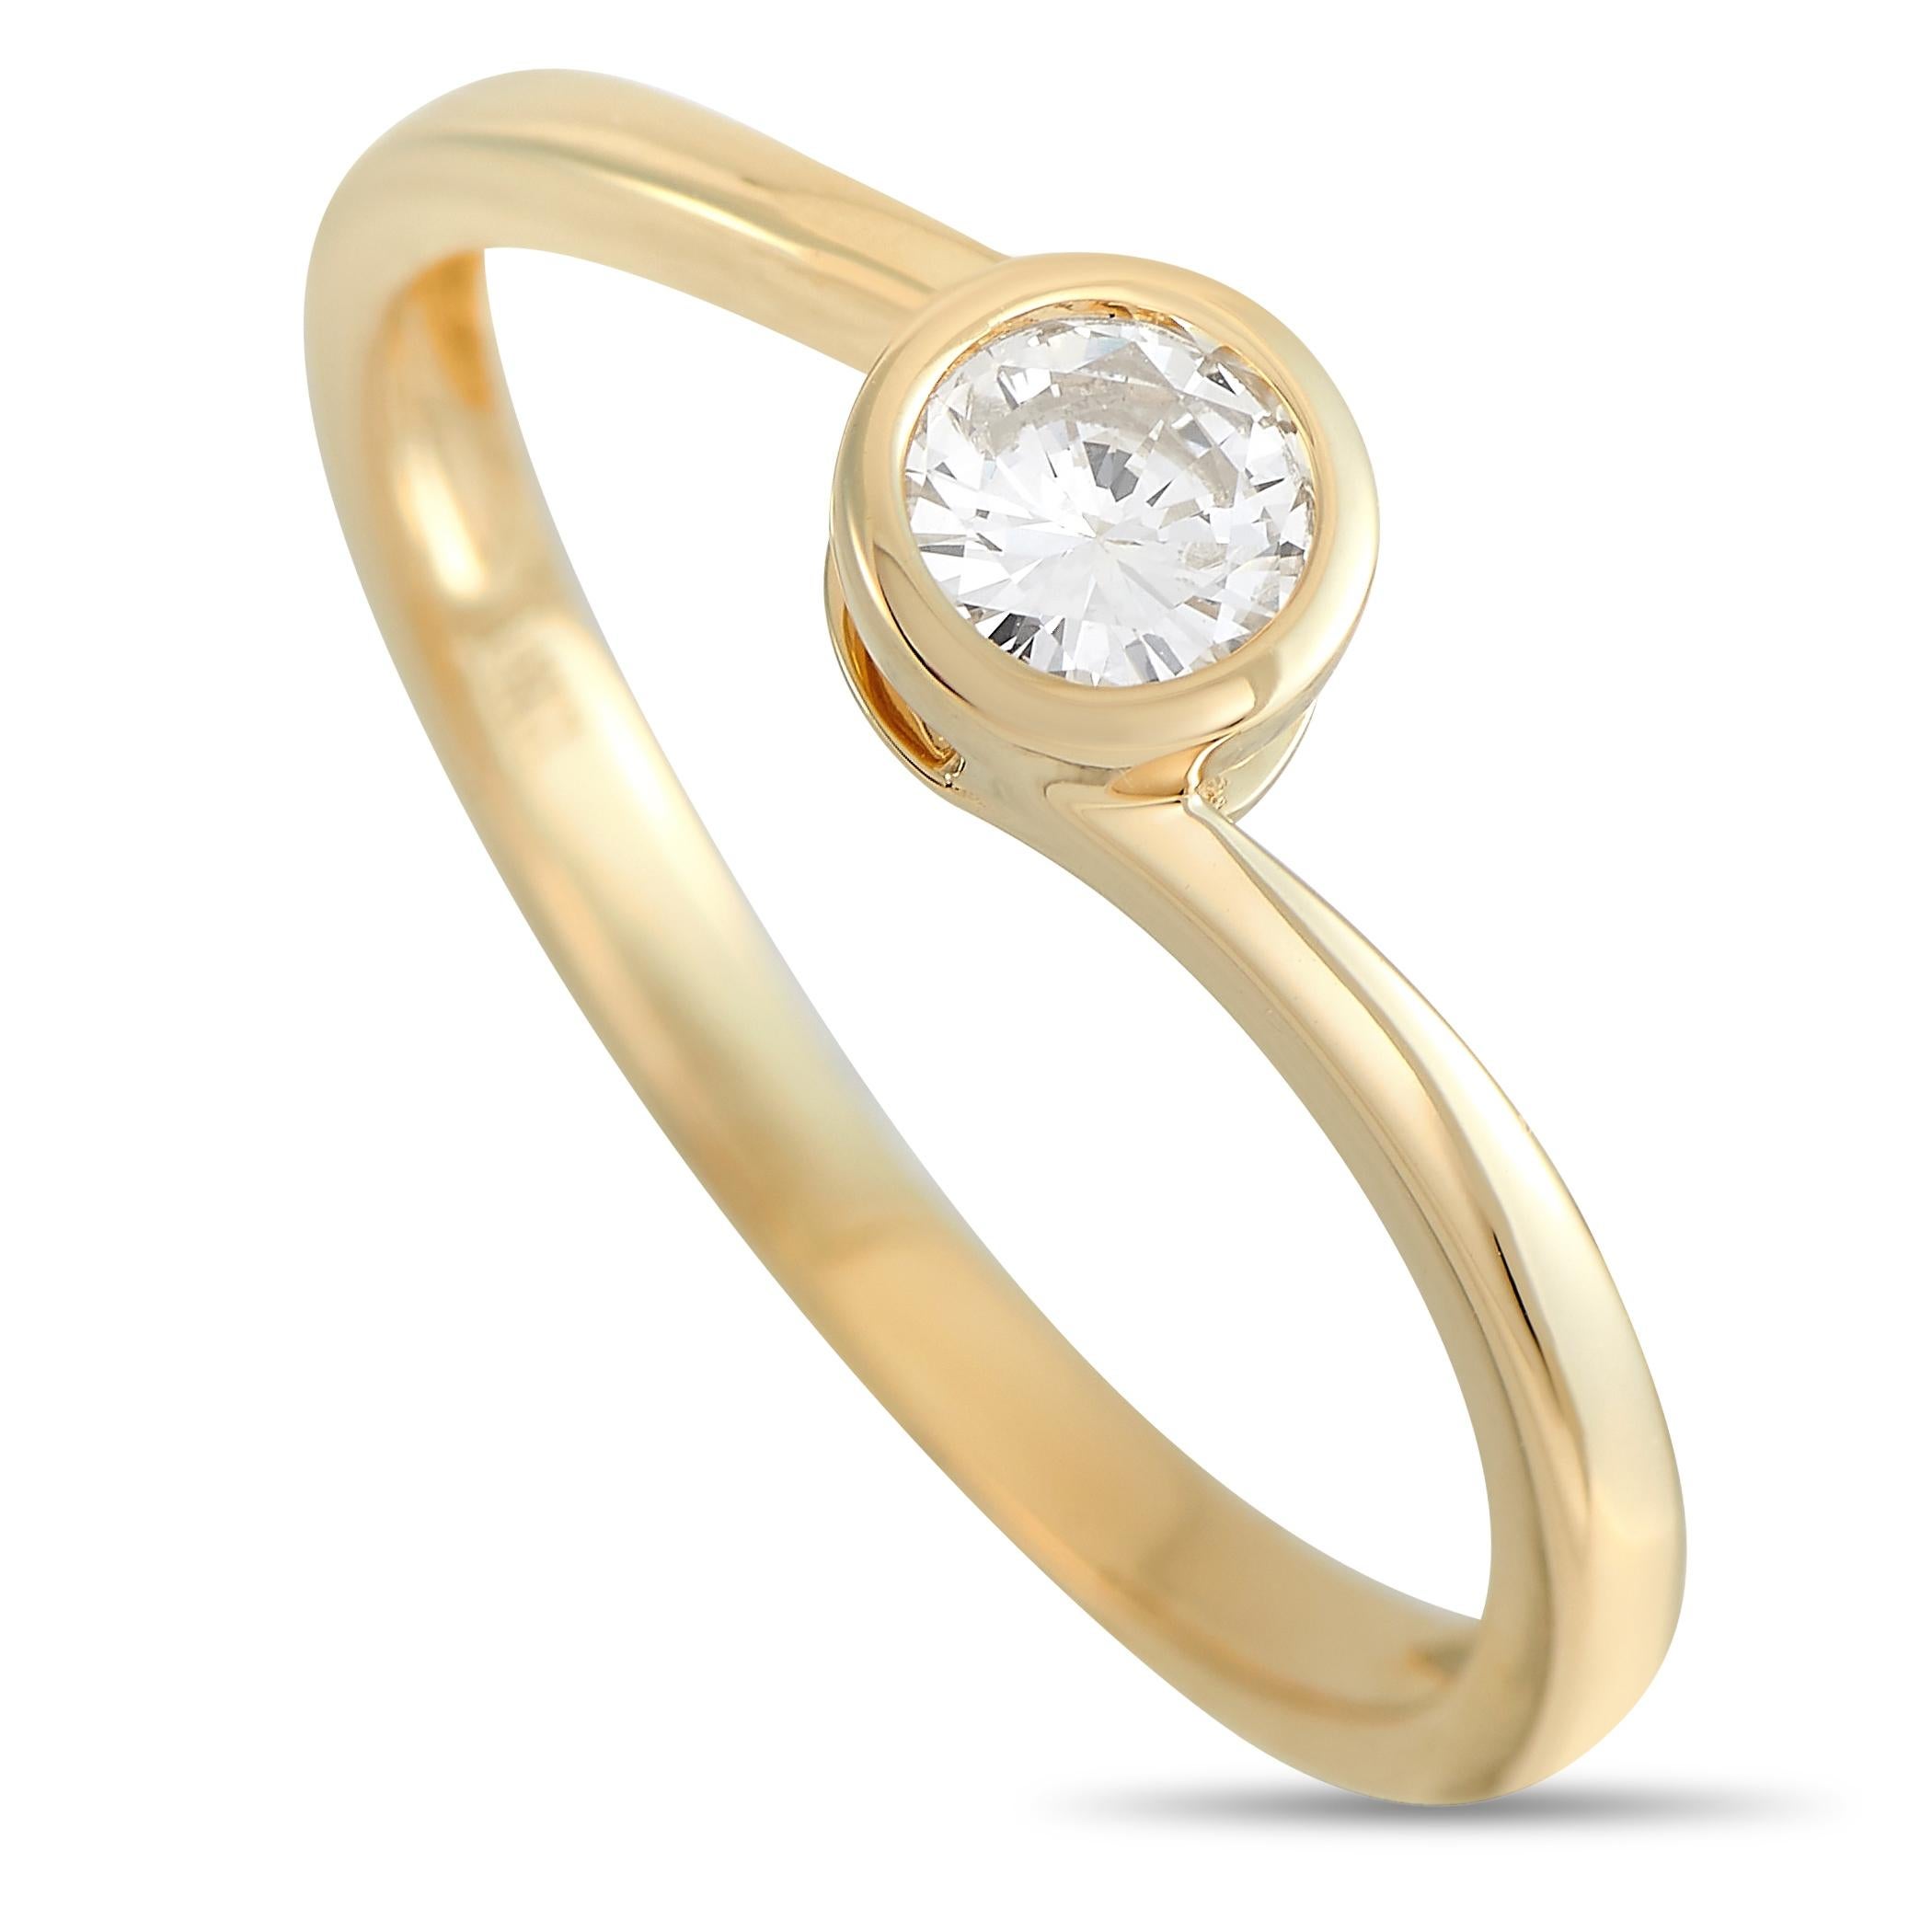 LB Exclusive 14K Yellow Gold 0.26 Ct Diamond Solitaire Ring In New Condition For Sale In Southampton, PA